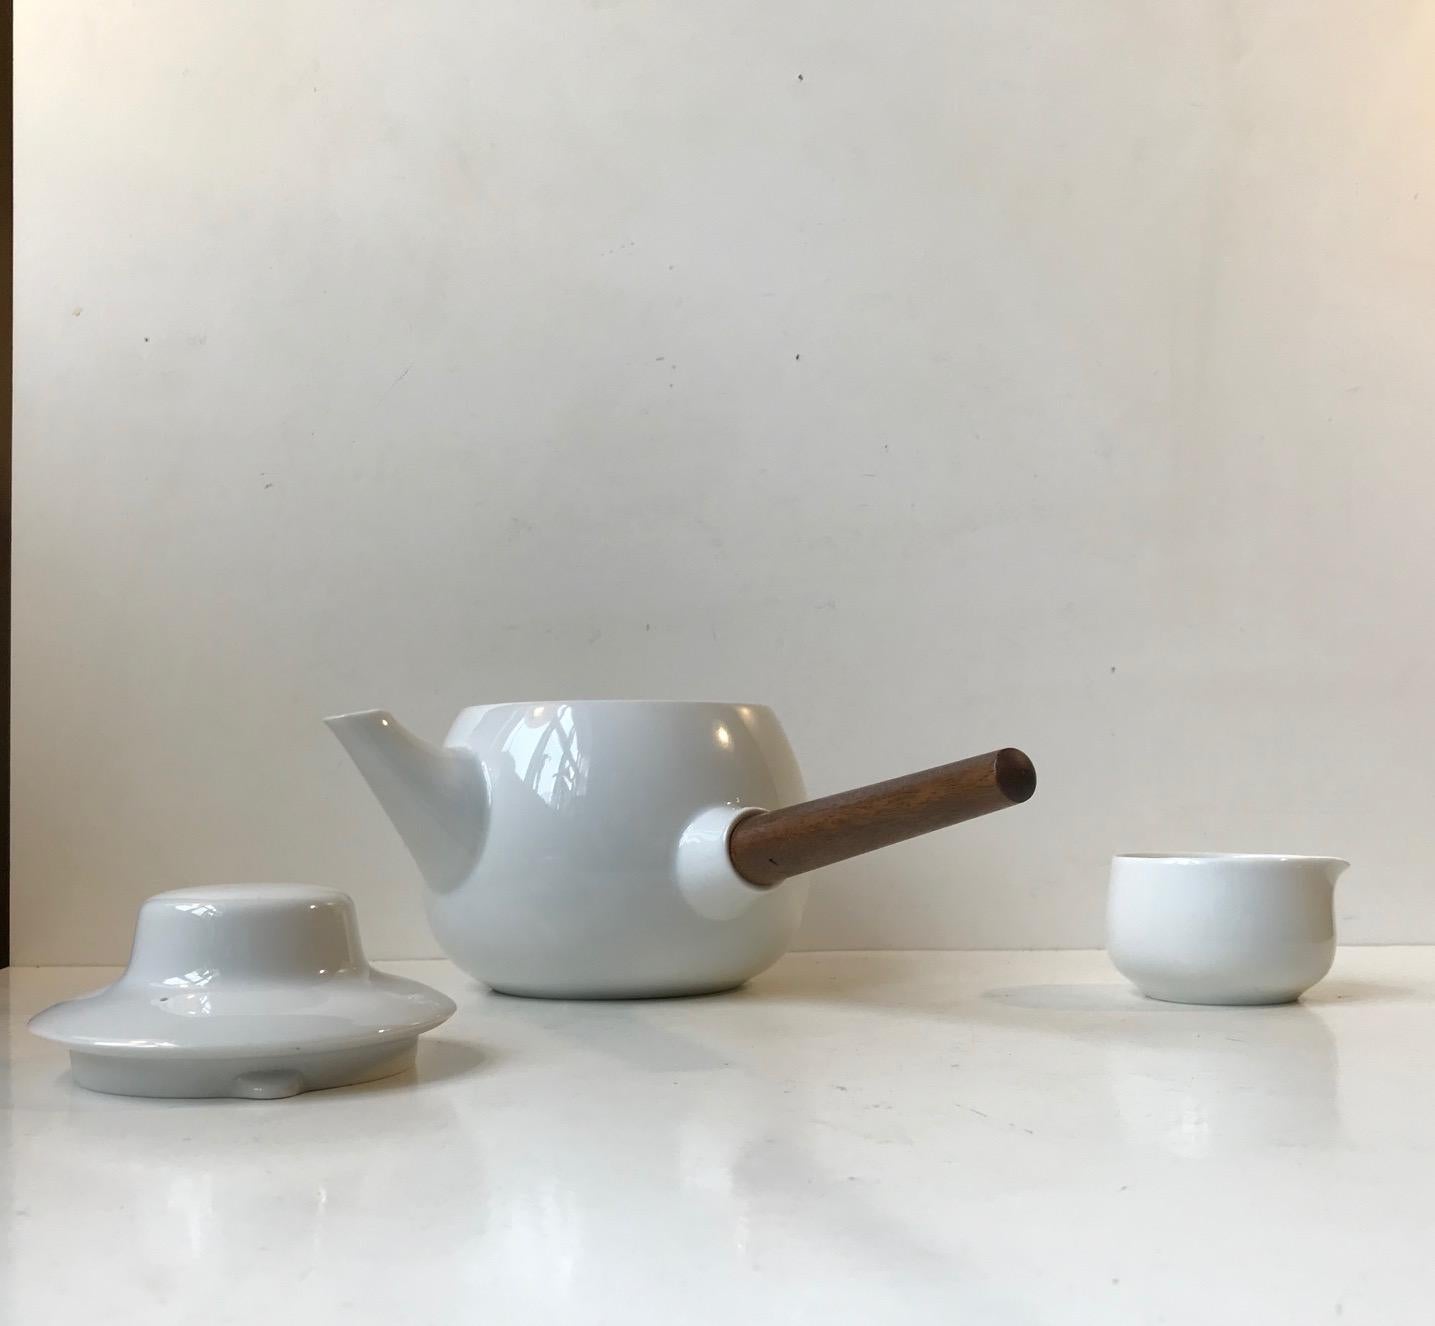 Important design by Henning Koppel exhibited at the British Museum and Museum of Modern Art in New York. This set consist of a milk/cream jug and the Koppel Characteristic teapot with its tapered handle in solid teak. It is called Form 24 and was